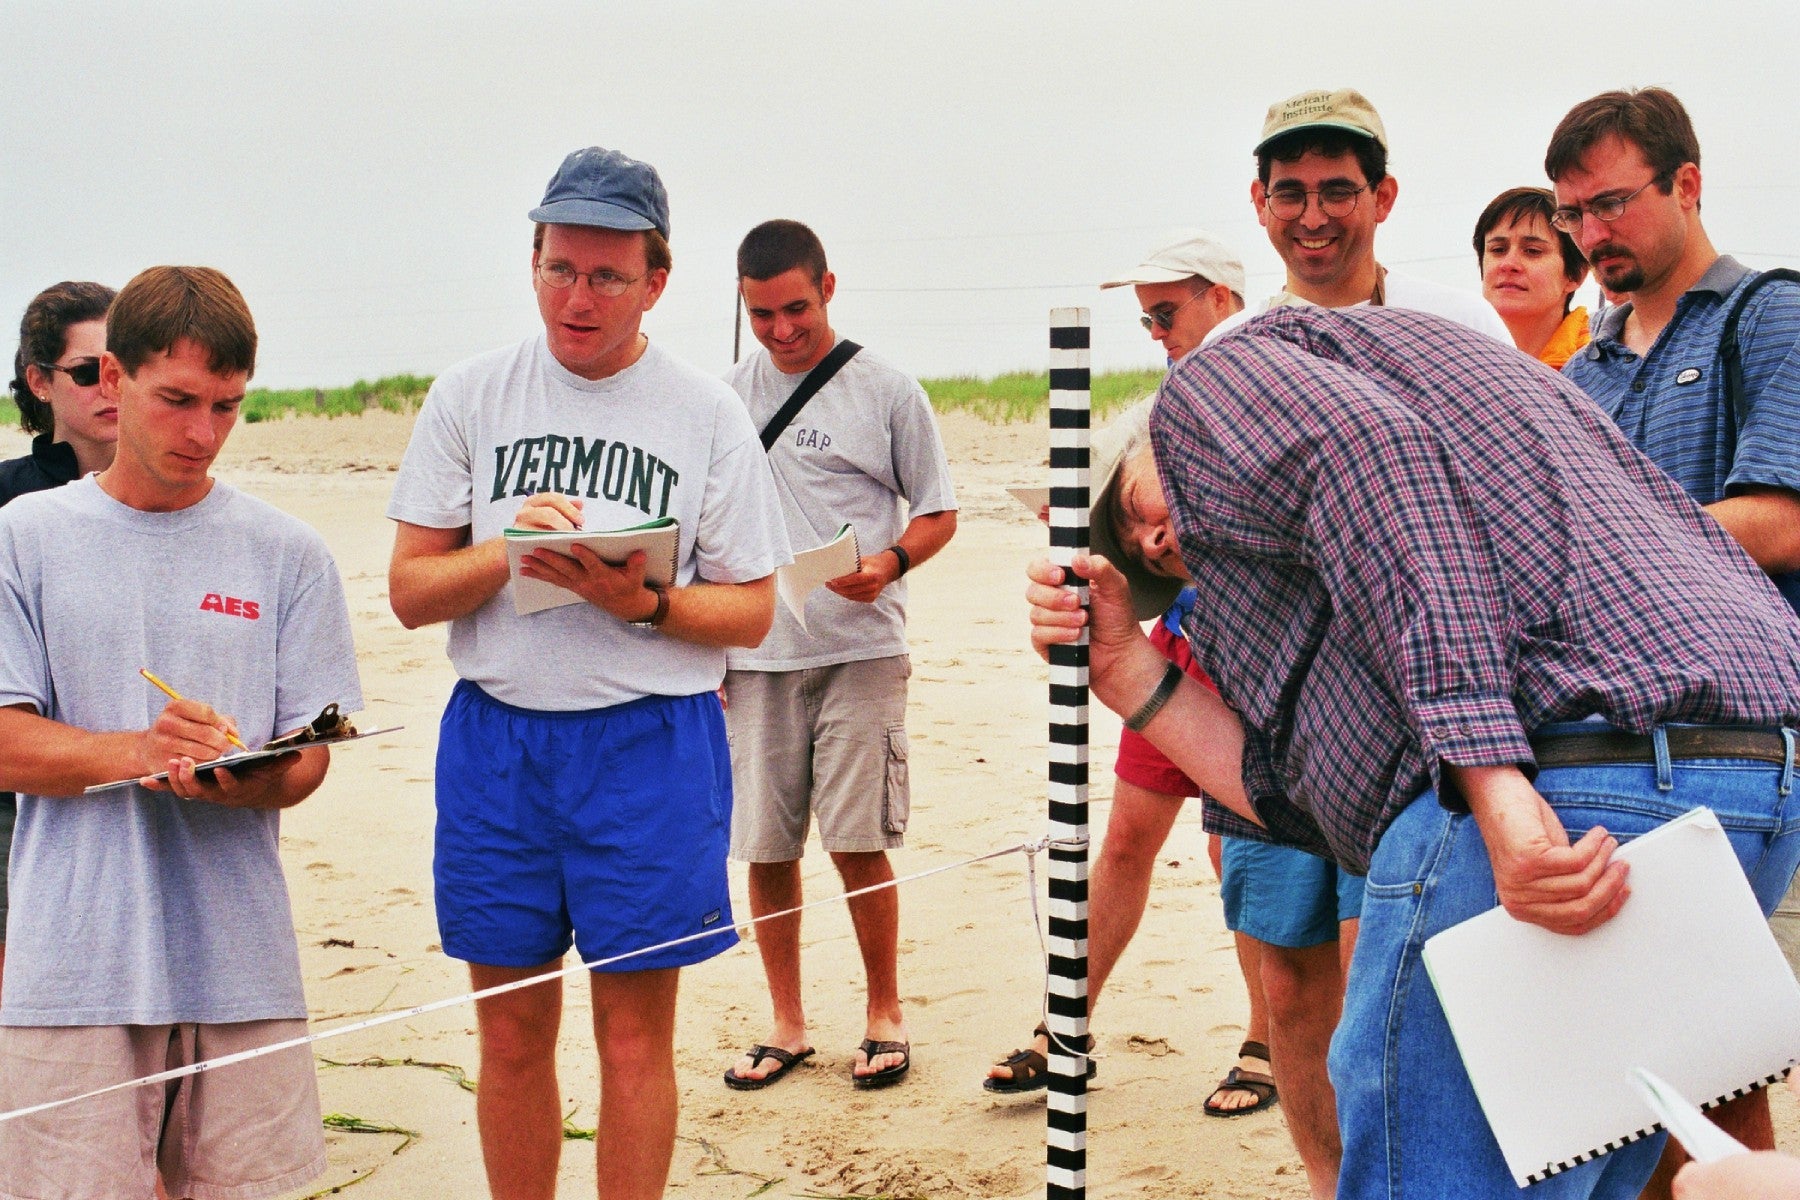 Group of people from 2000 standing around and measuring objects